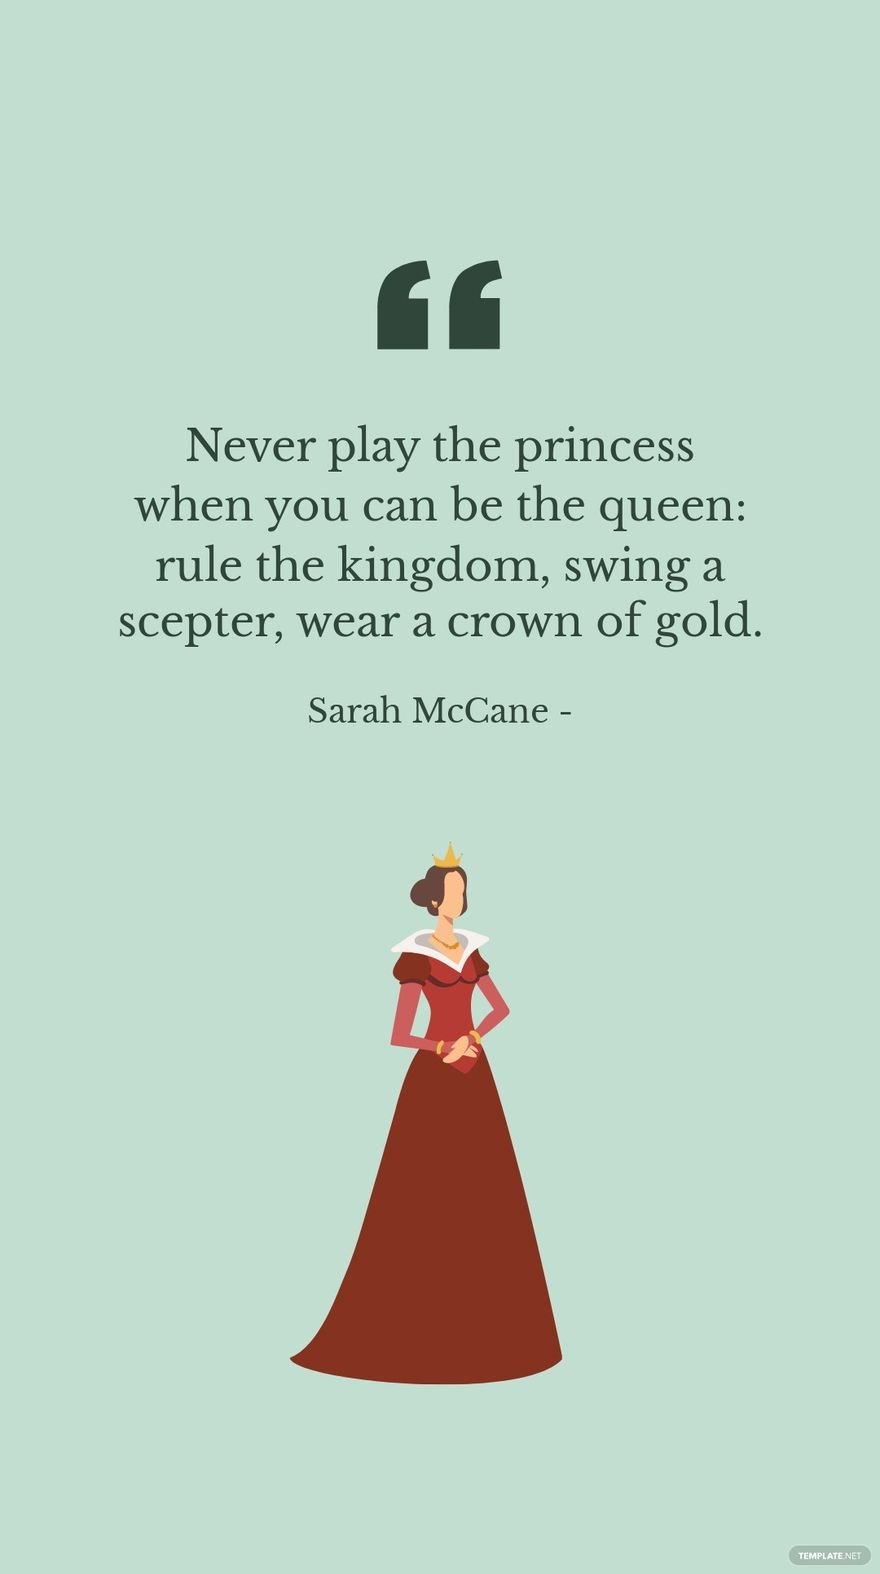 Sarah McCane - Never play the princess when you can be the queen: rule the kingdom, swing a scepter, wear a crown of gold.